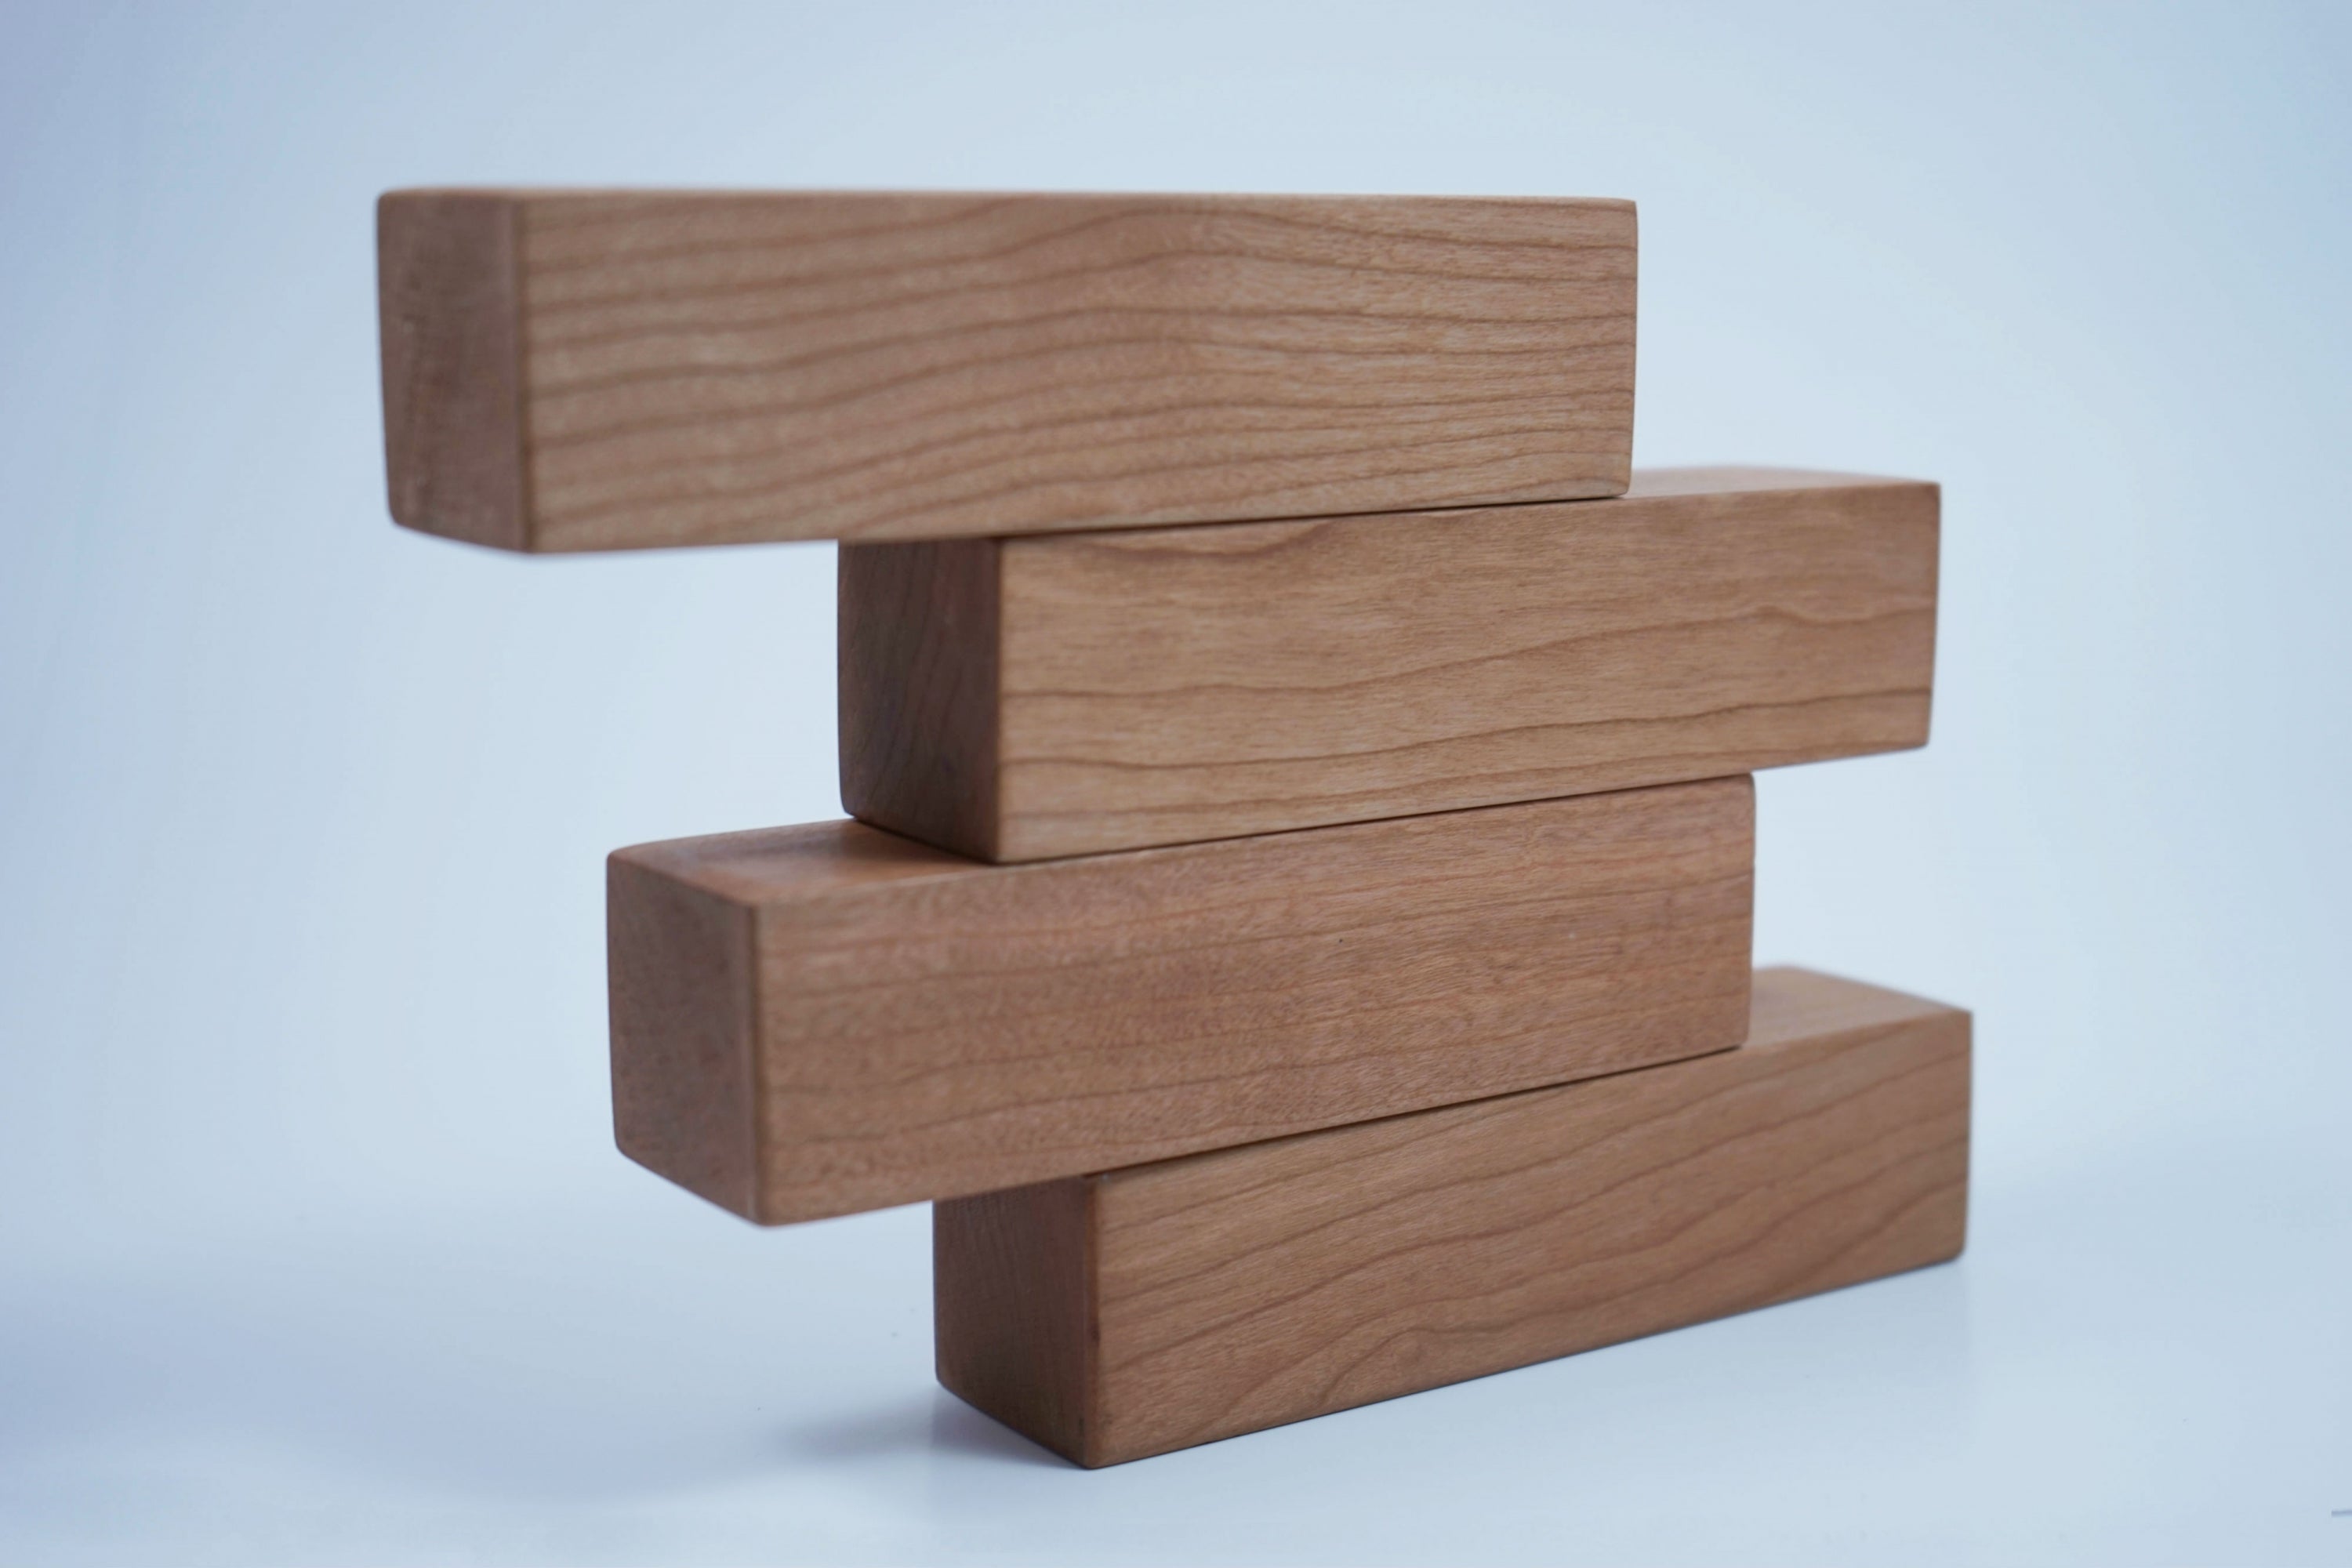 Stacked wooden blocks